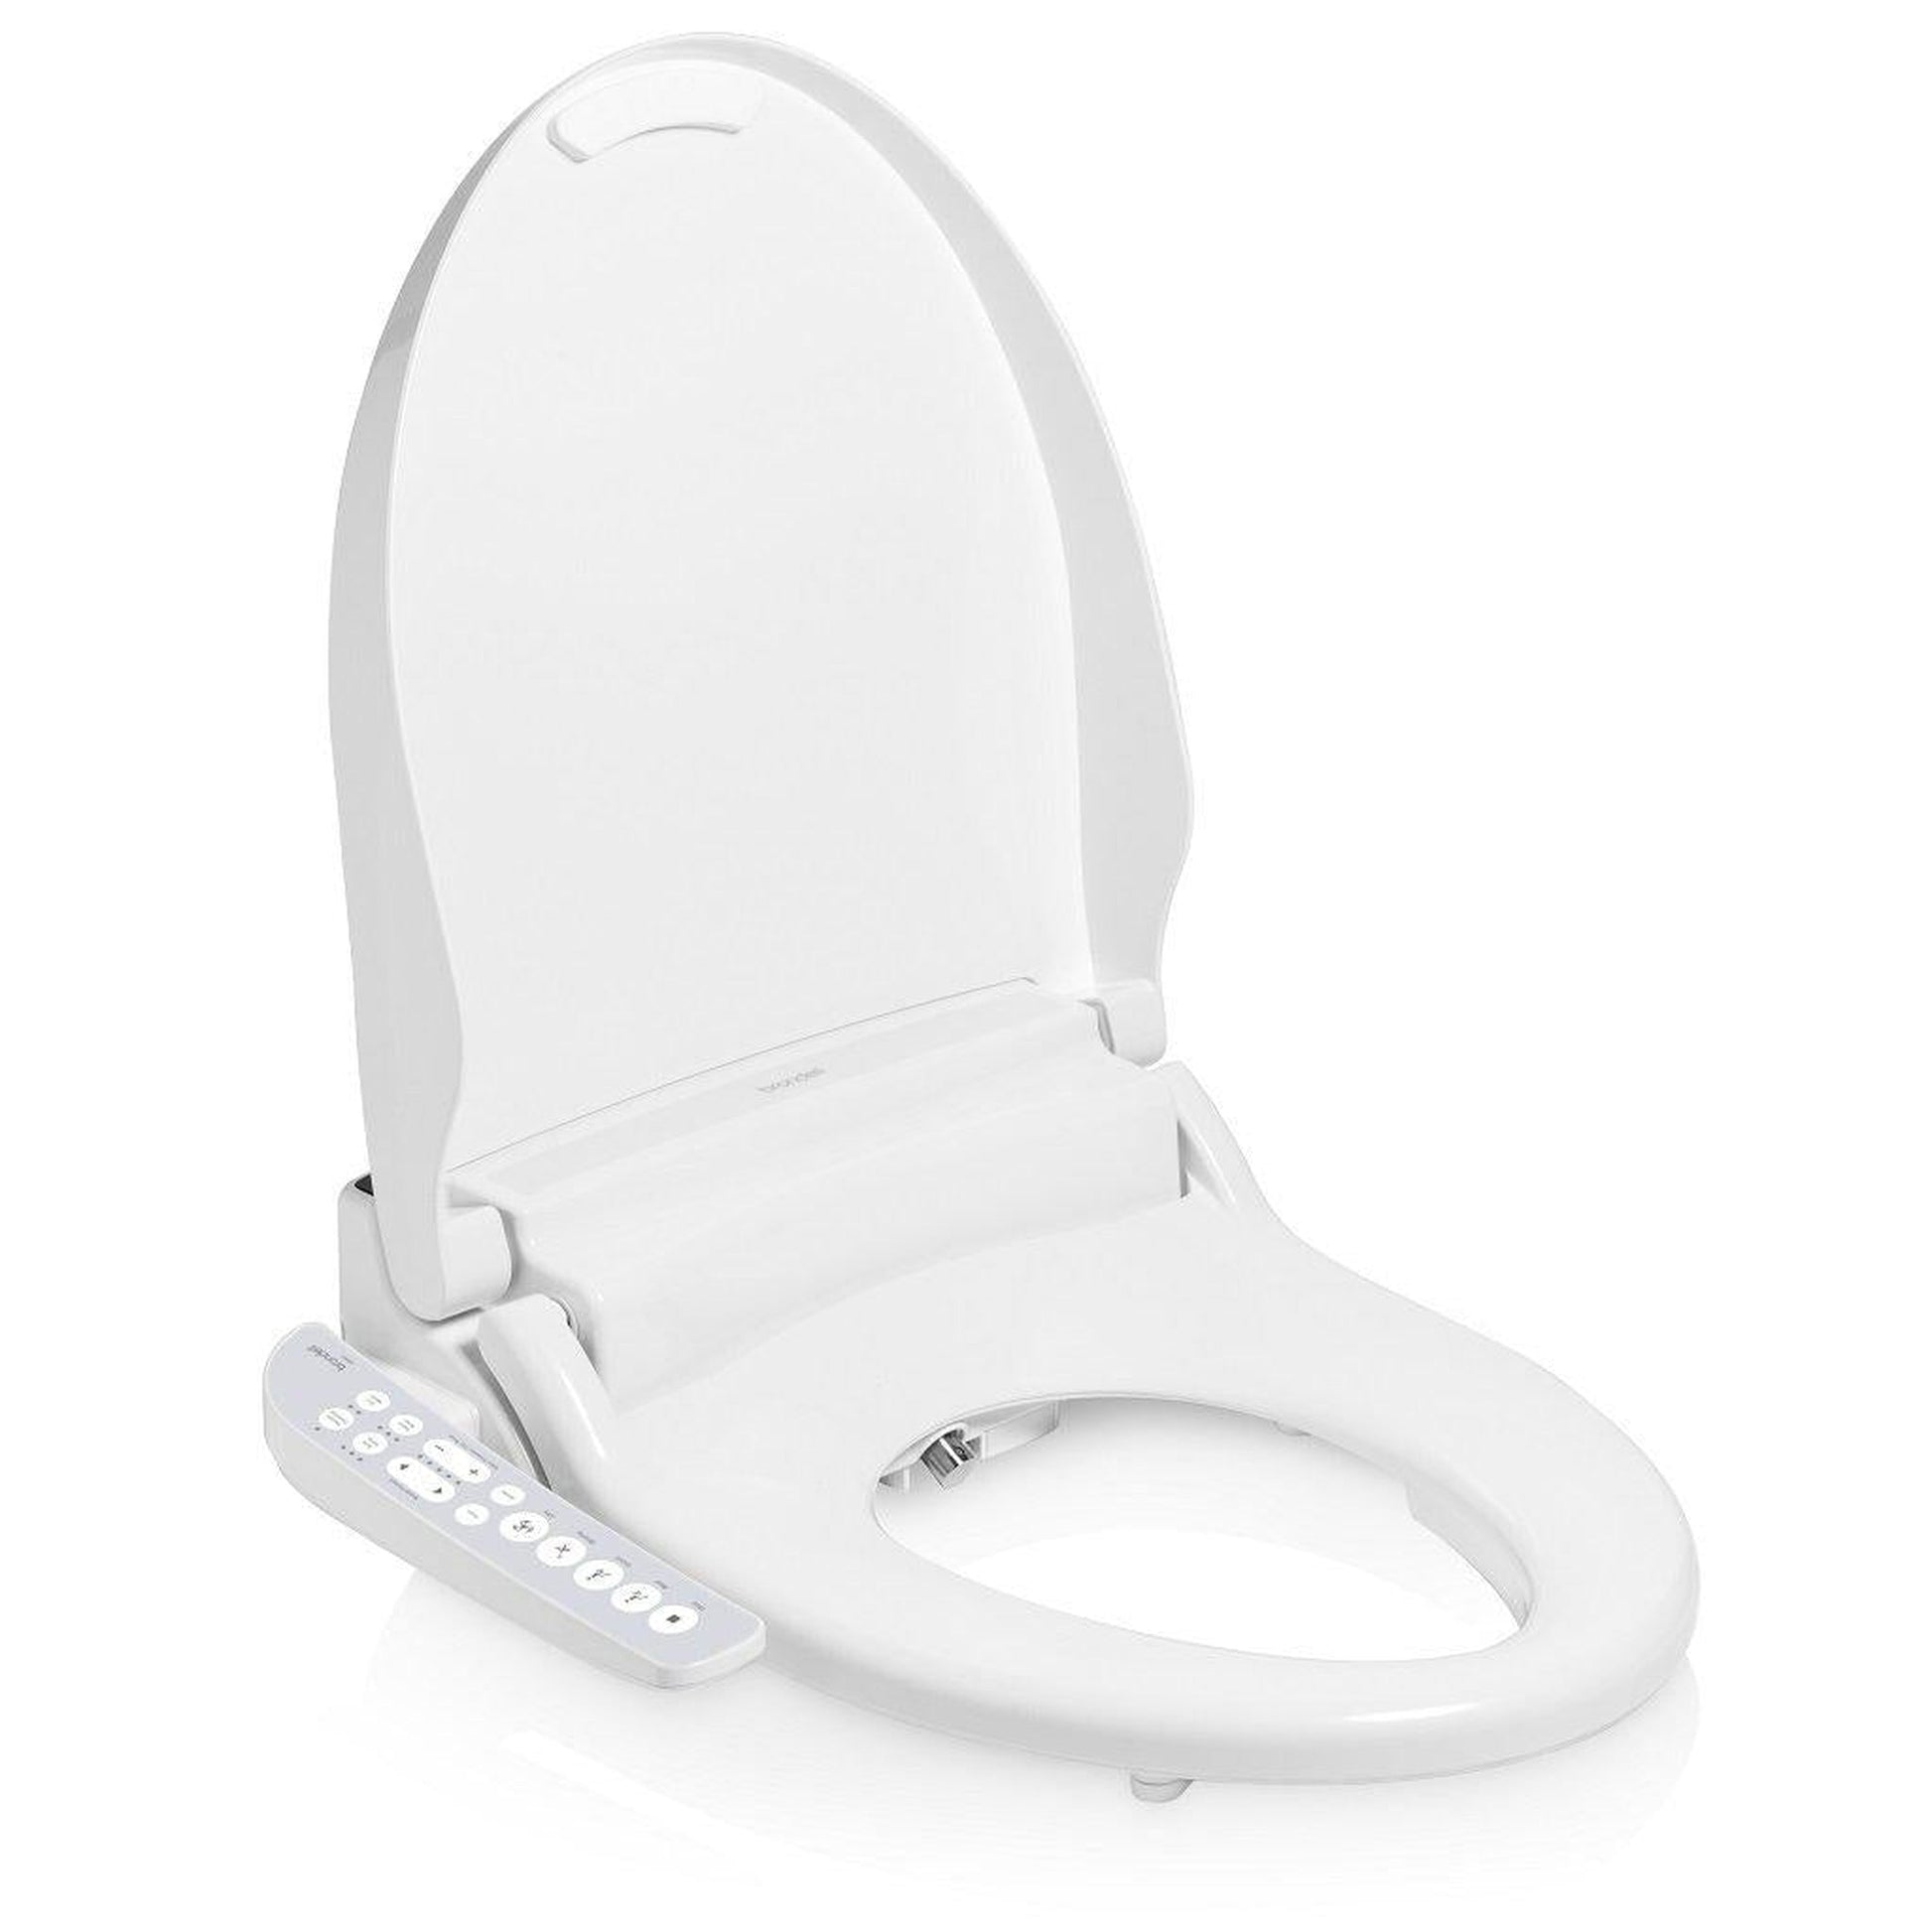 Brondell Swash Select DR801 20.7" White Elongated Electric Advanced Bidet Toilet Seat With Side Control Panel